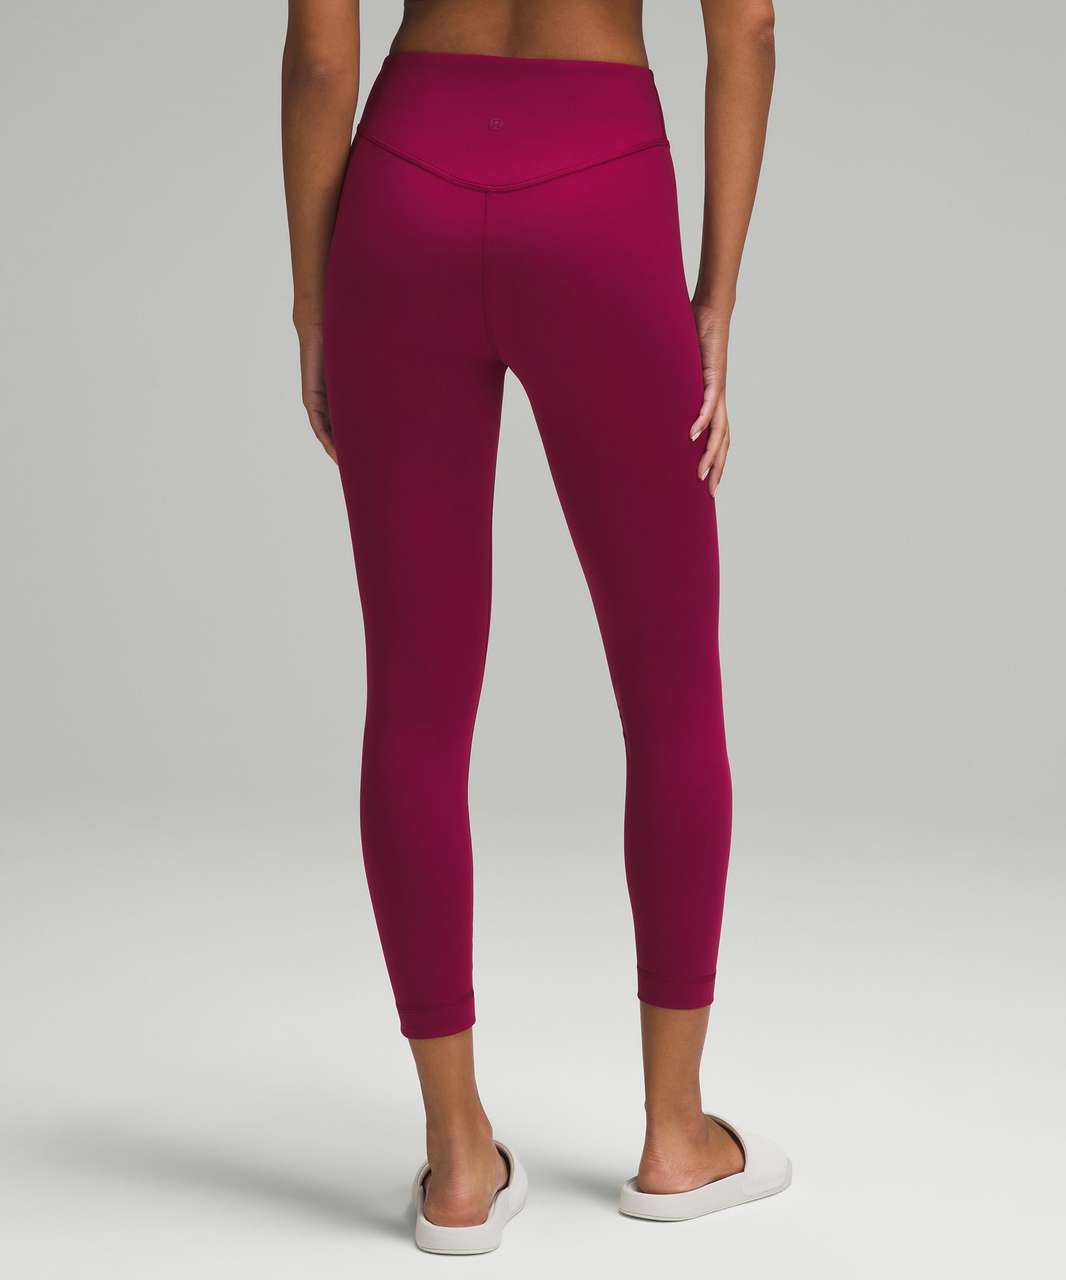 Lululemon Wunder Under SmoothCover High-Rise Tight 25" - Deep Luxe